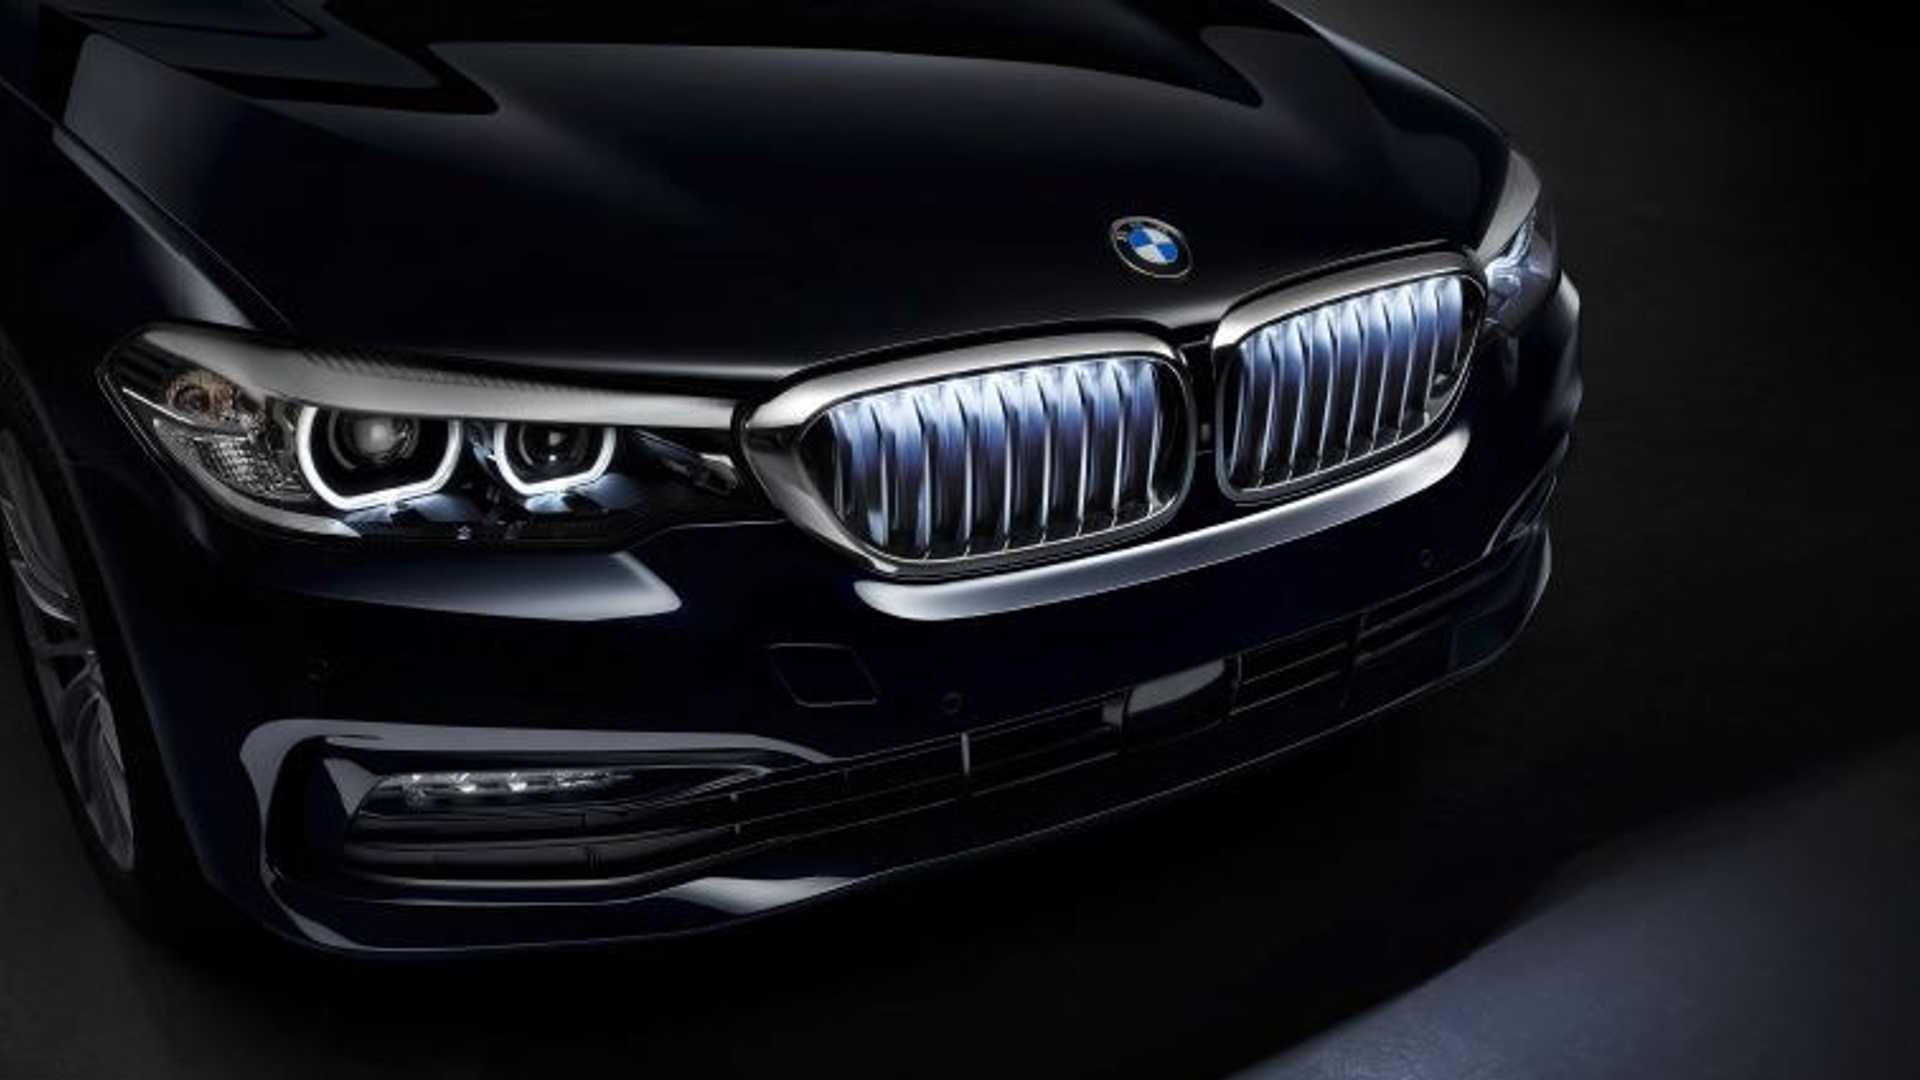 BMW 5 Series Can Now Be Fitted With Illuminated Kidney Grille